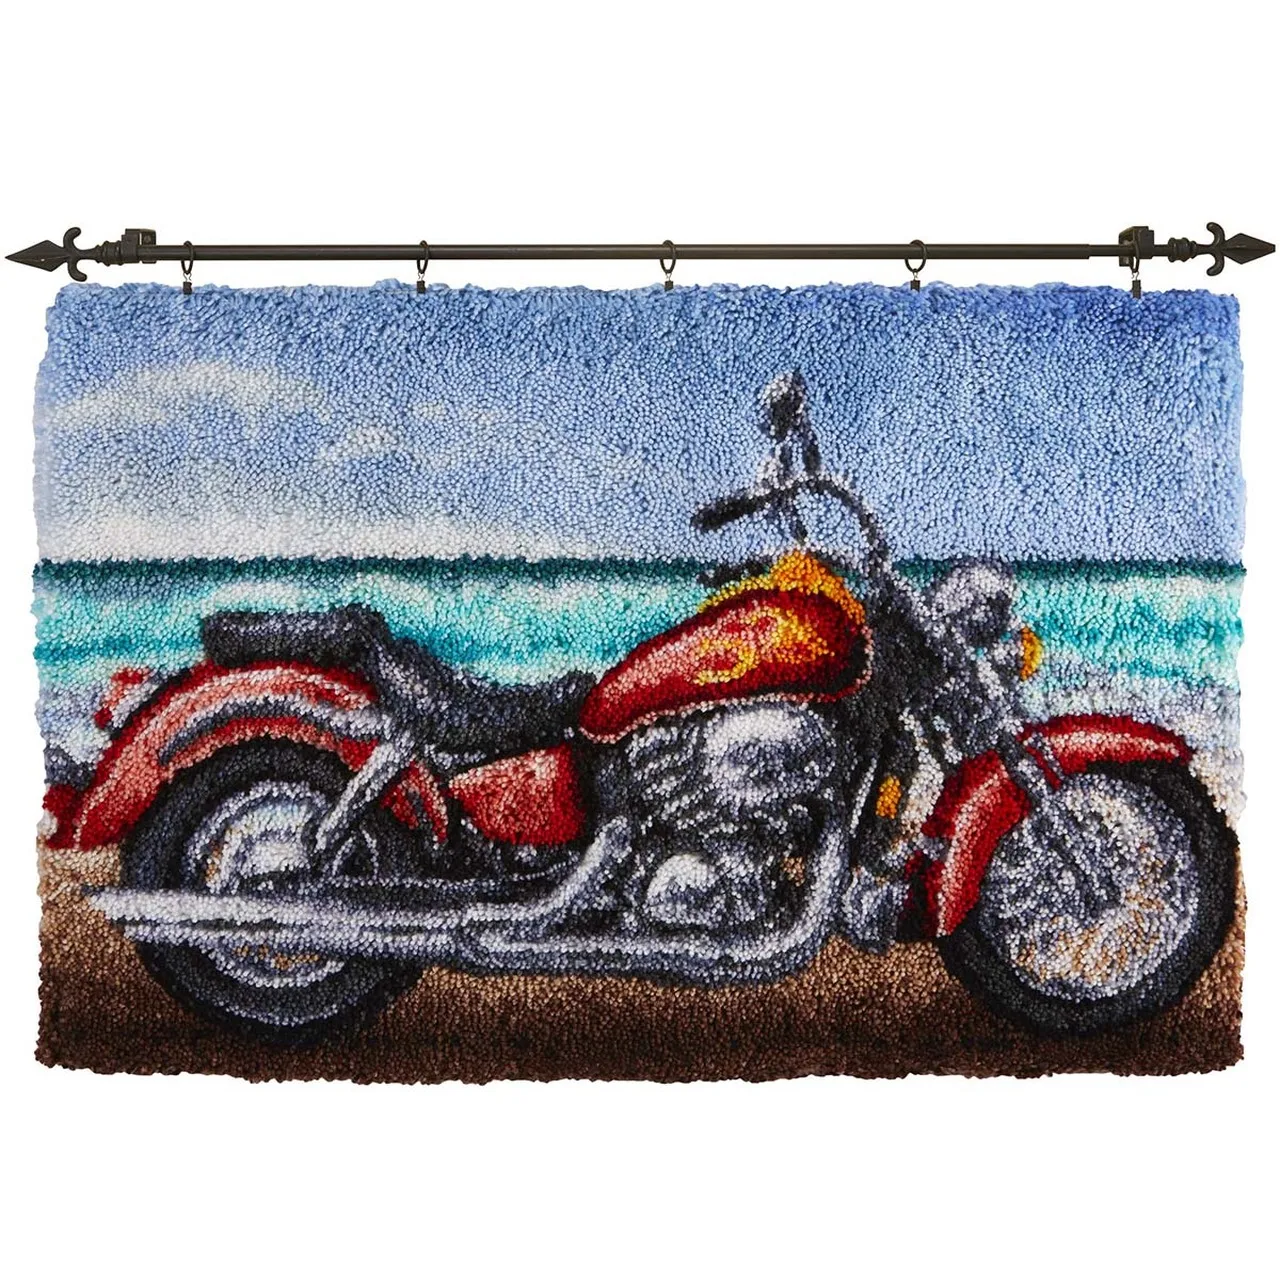 

Latch Hook Rug Seaside Motortcycle Wall Tapestry DIY Carpet Rug Pre-Printed Canvas with Non-Skid Backing Floor Mat 102x69cm